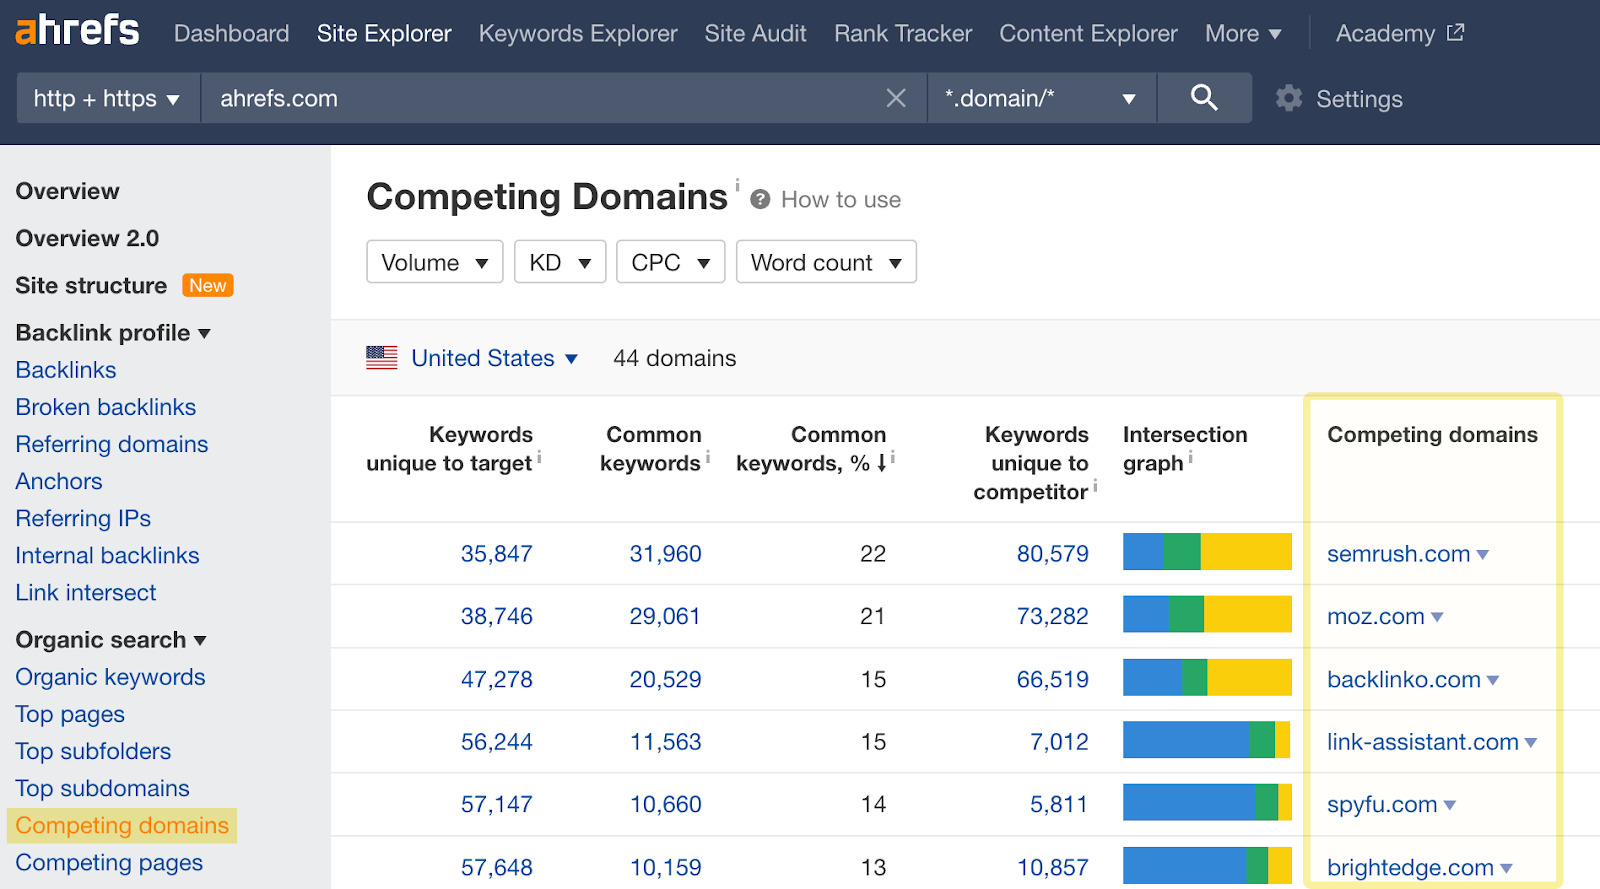 Competing Domains report results 